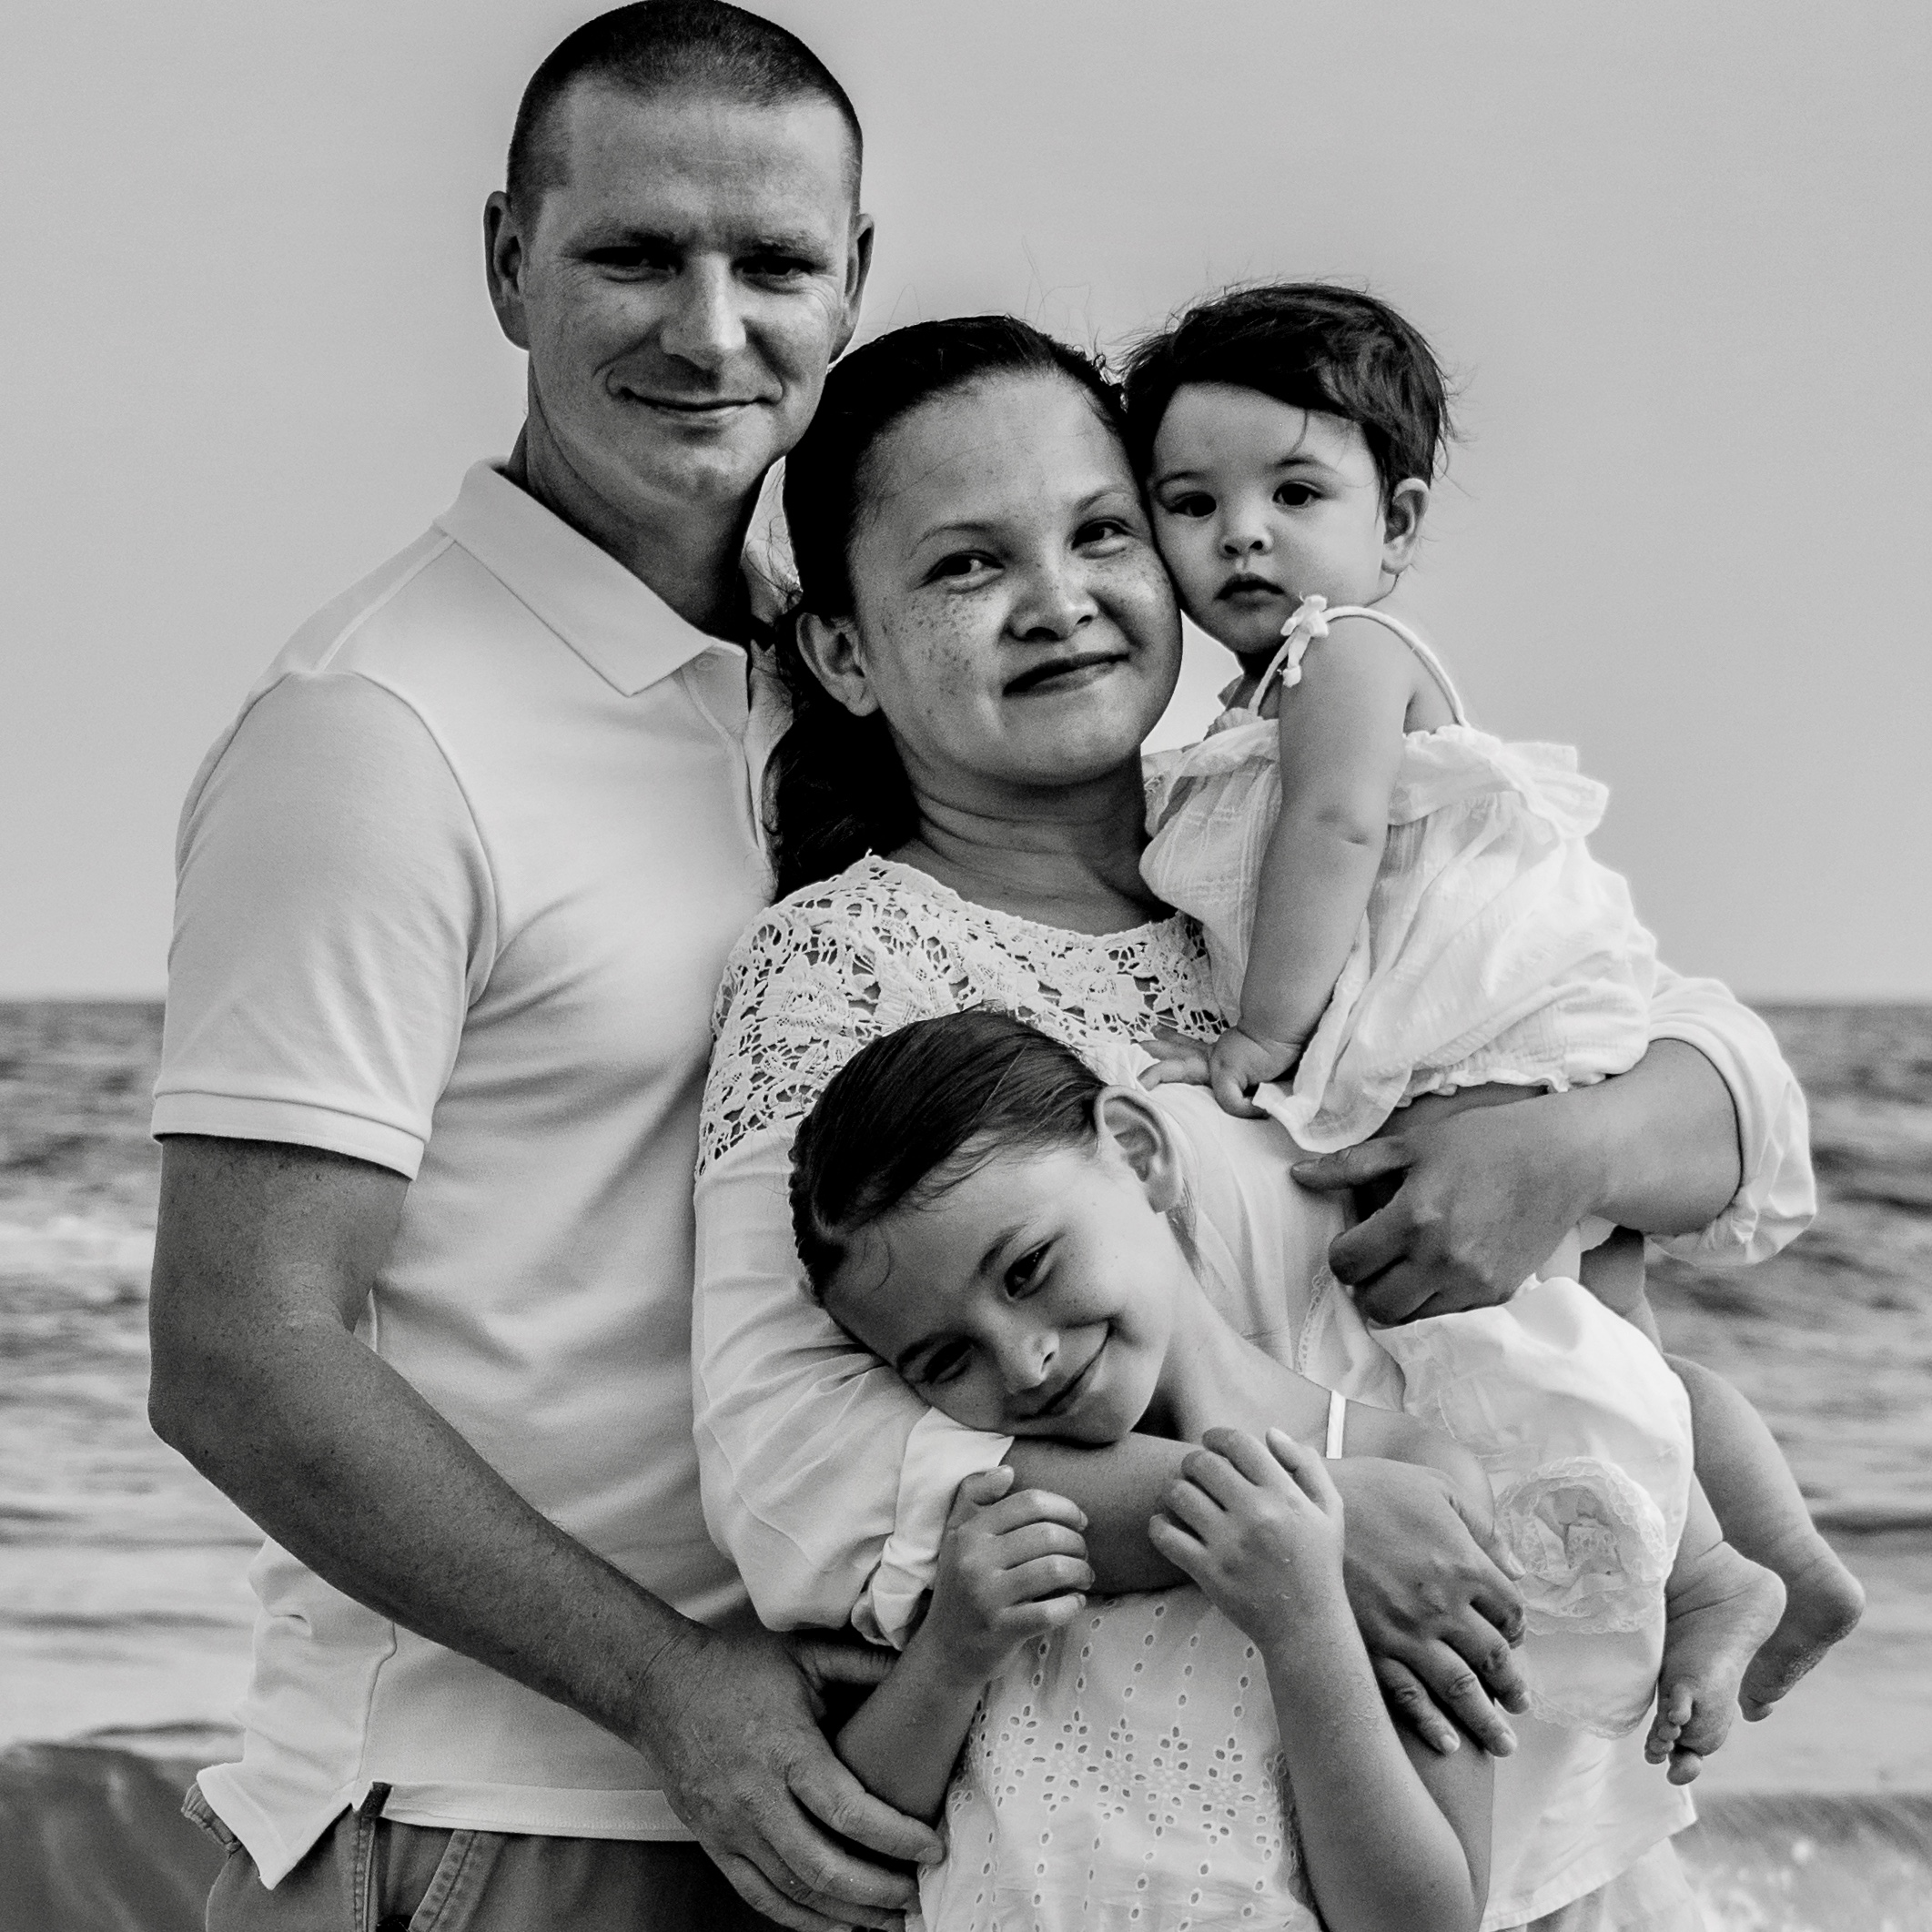 Maria-Teresa King pictured with her husband and two daughters on a beach. King completed her degree in Health Services Administration from UL Lafayette.